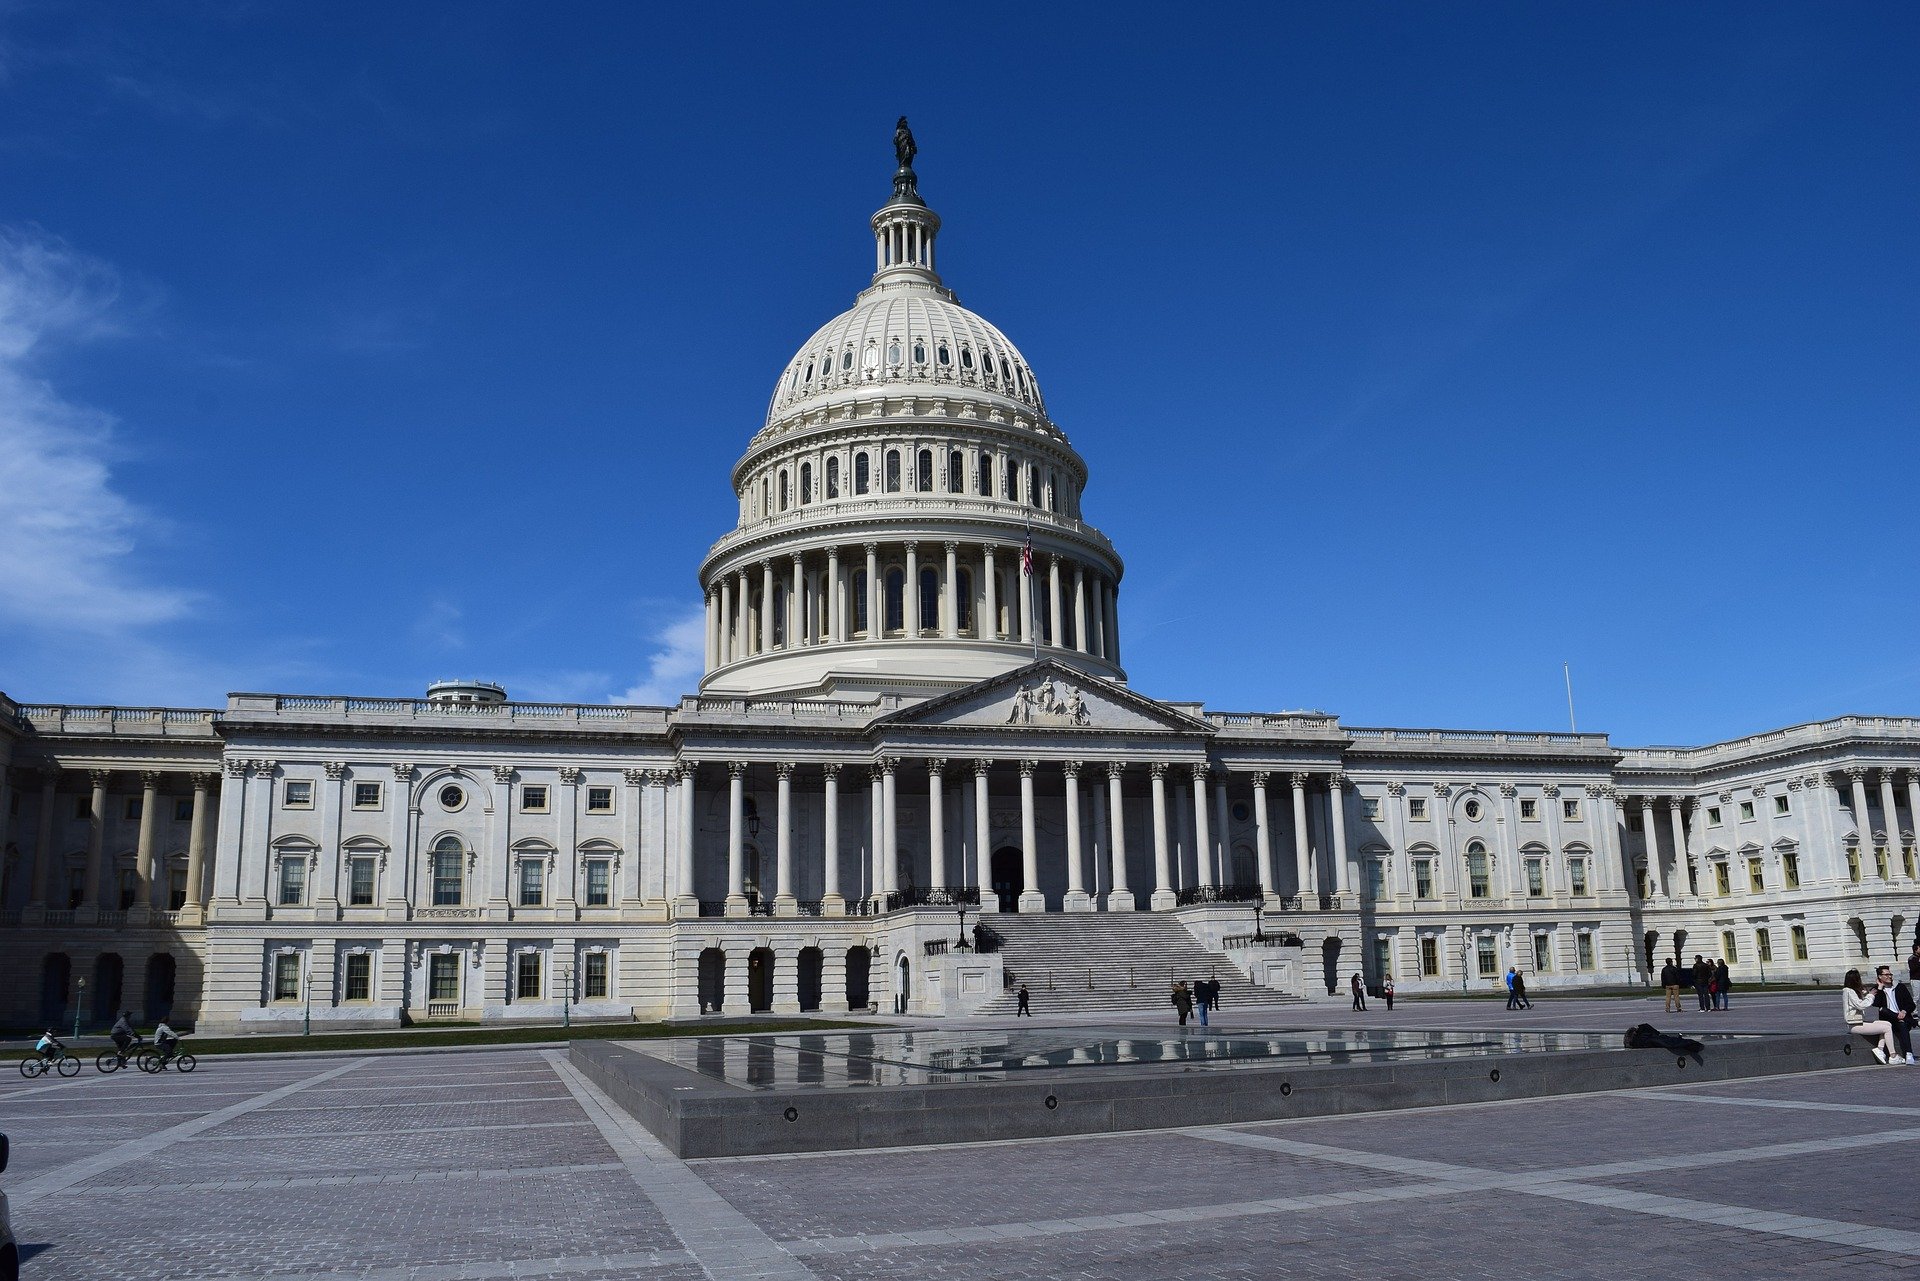 wide photograph of US Capitol building where congress candidates hope to get to by selling NFTs